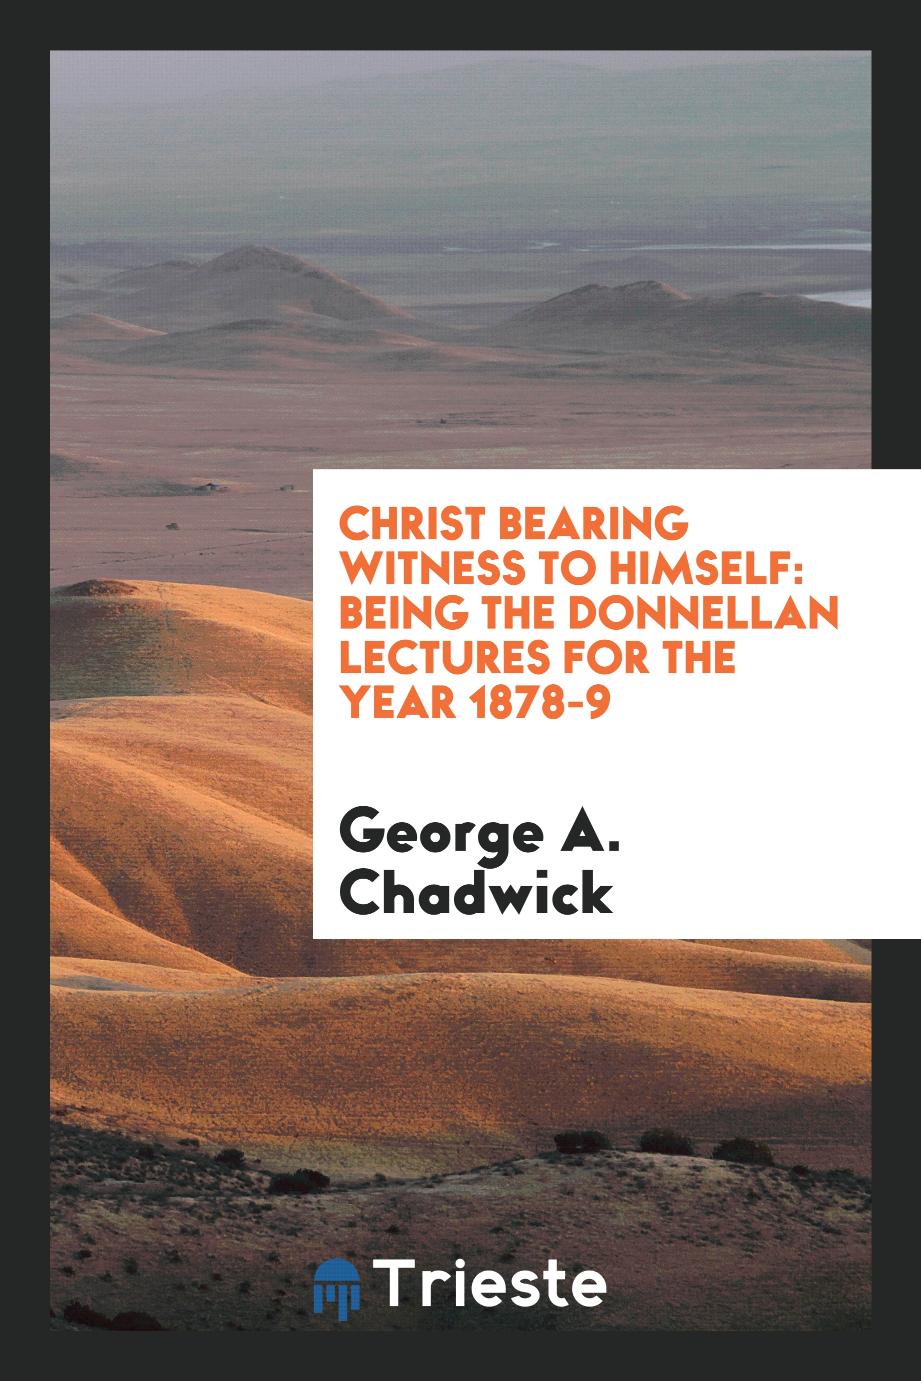 Christ Bearing Witness to Himself: Being the Donnellan Lectures for the Year 1878-9